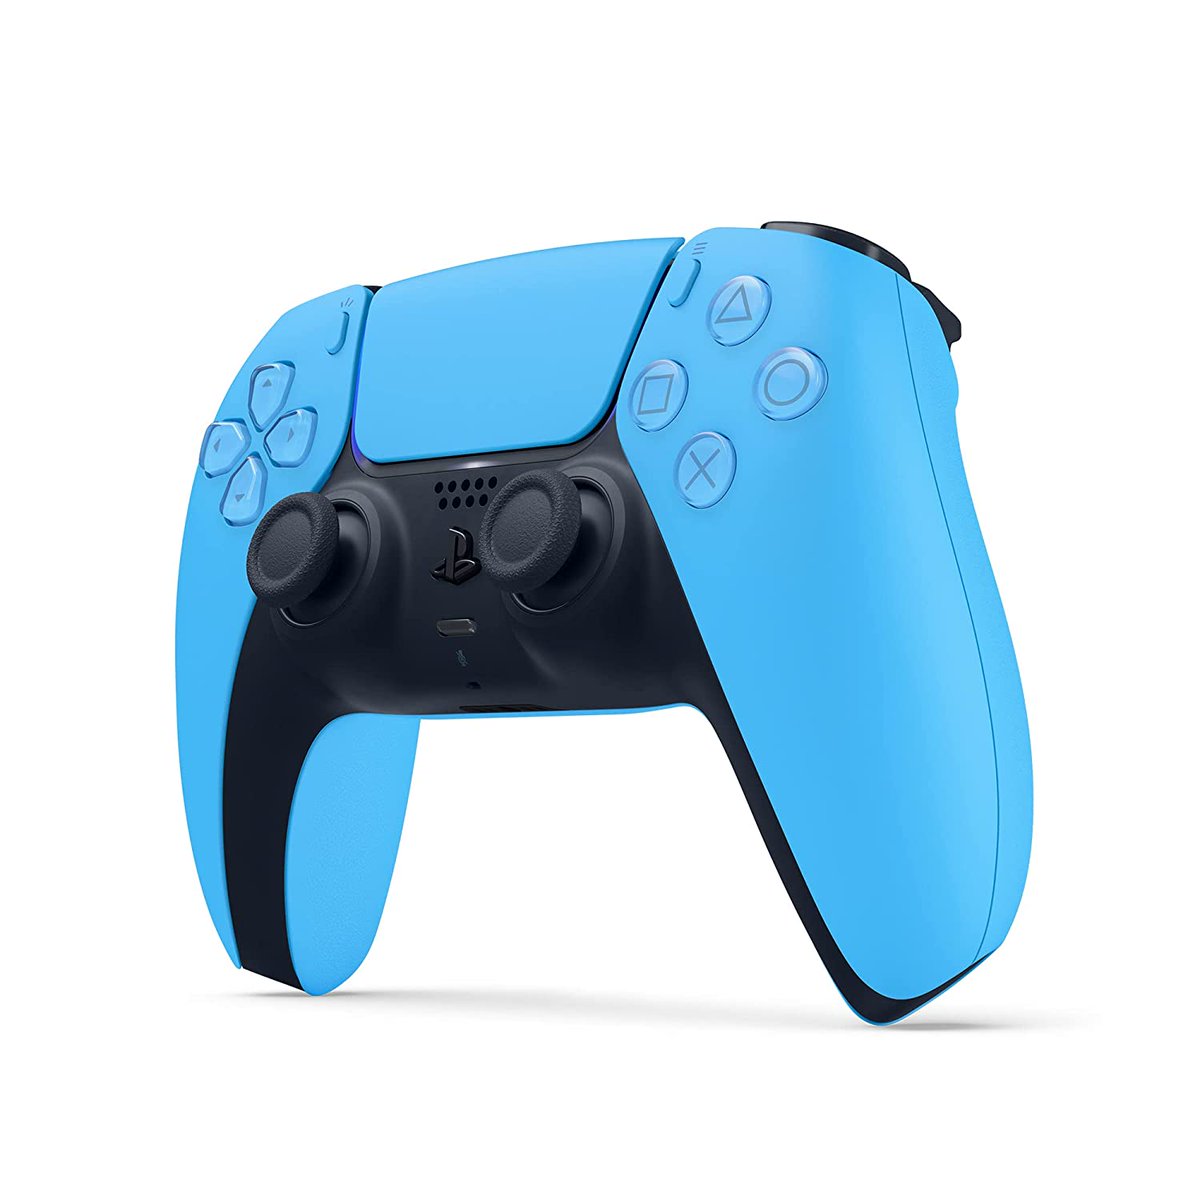 PlayStation DualSense Wireless Controller in Starlight Blue is discounted to $69 at Amazon (was $74.99) 💙 zdcs.link/xwJwO